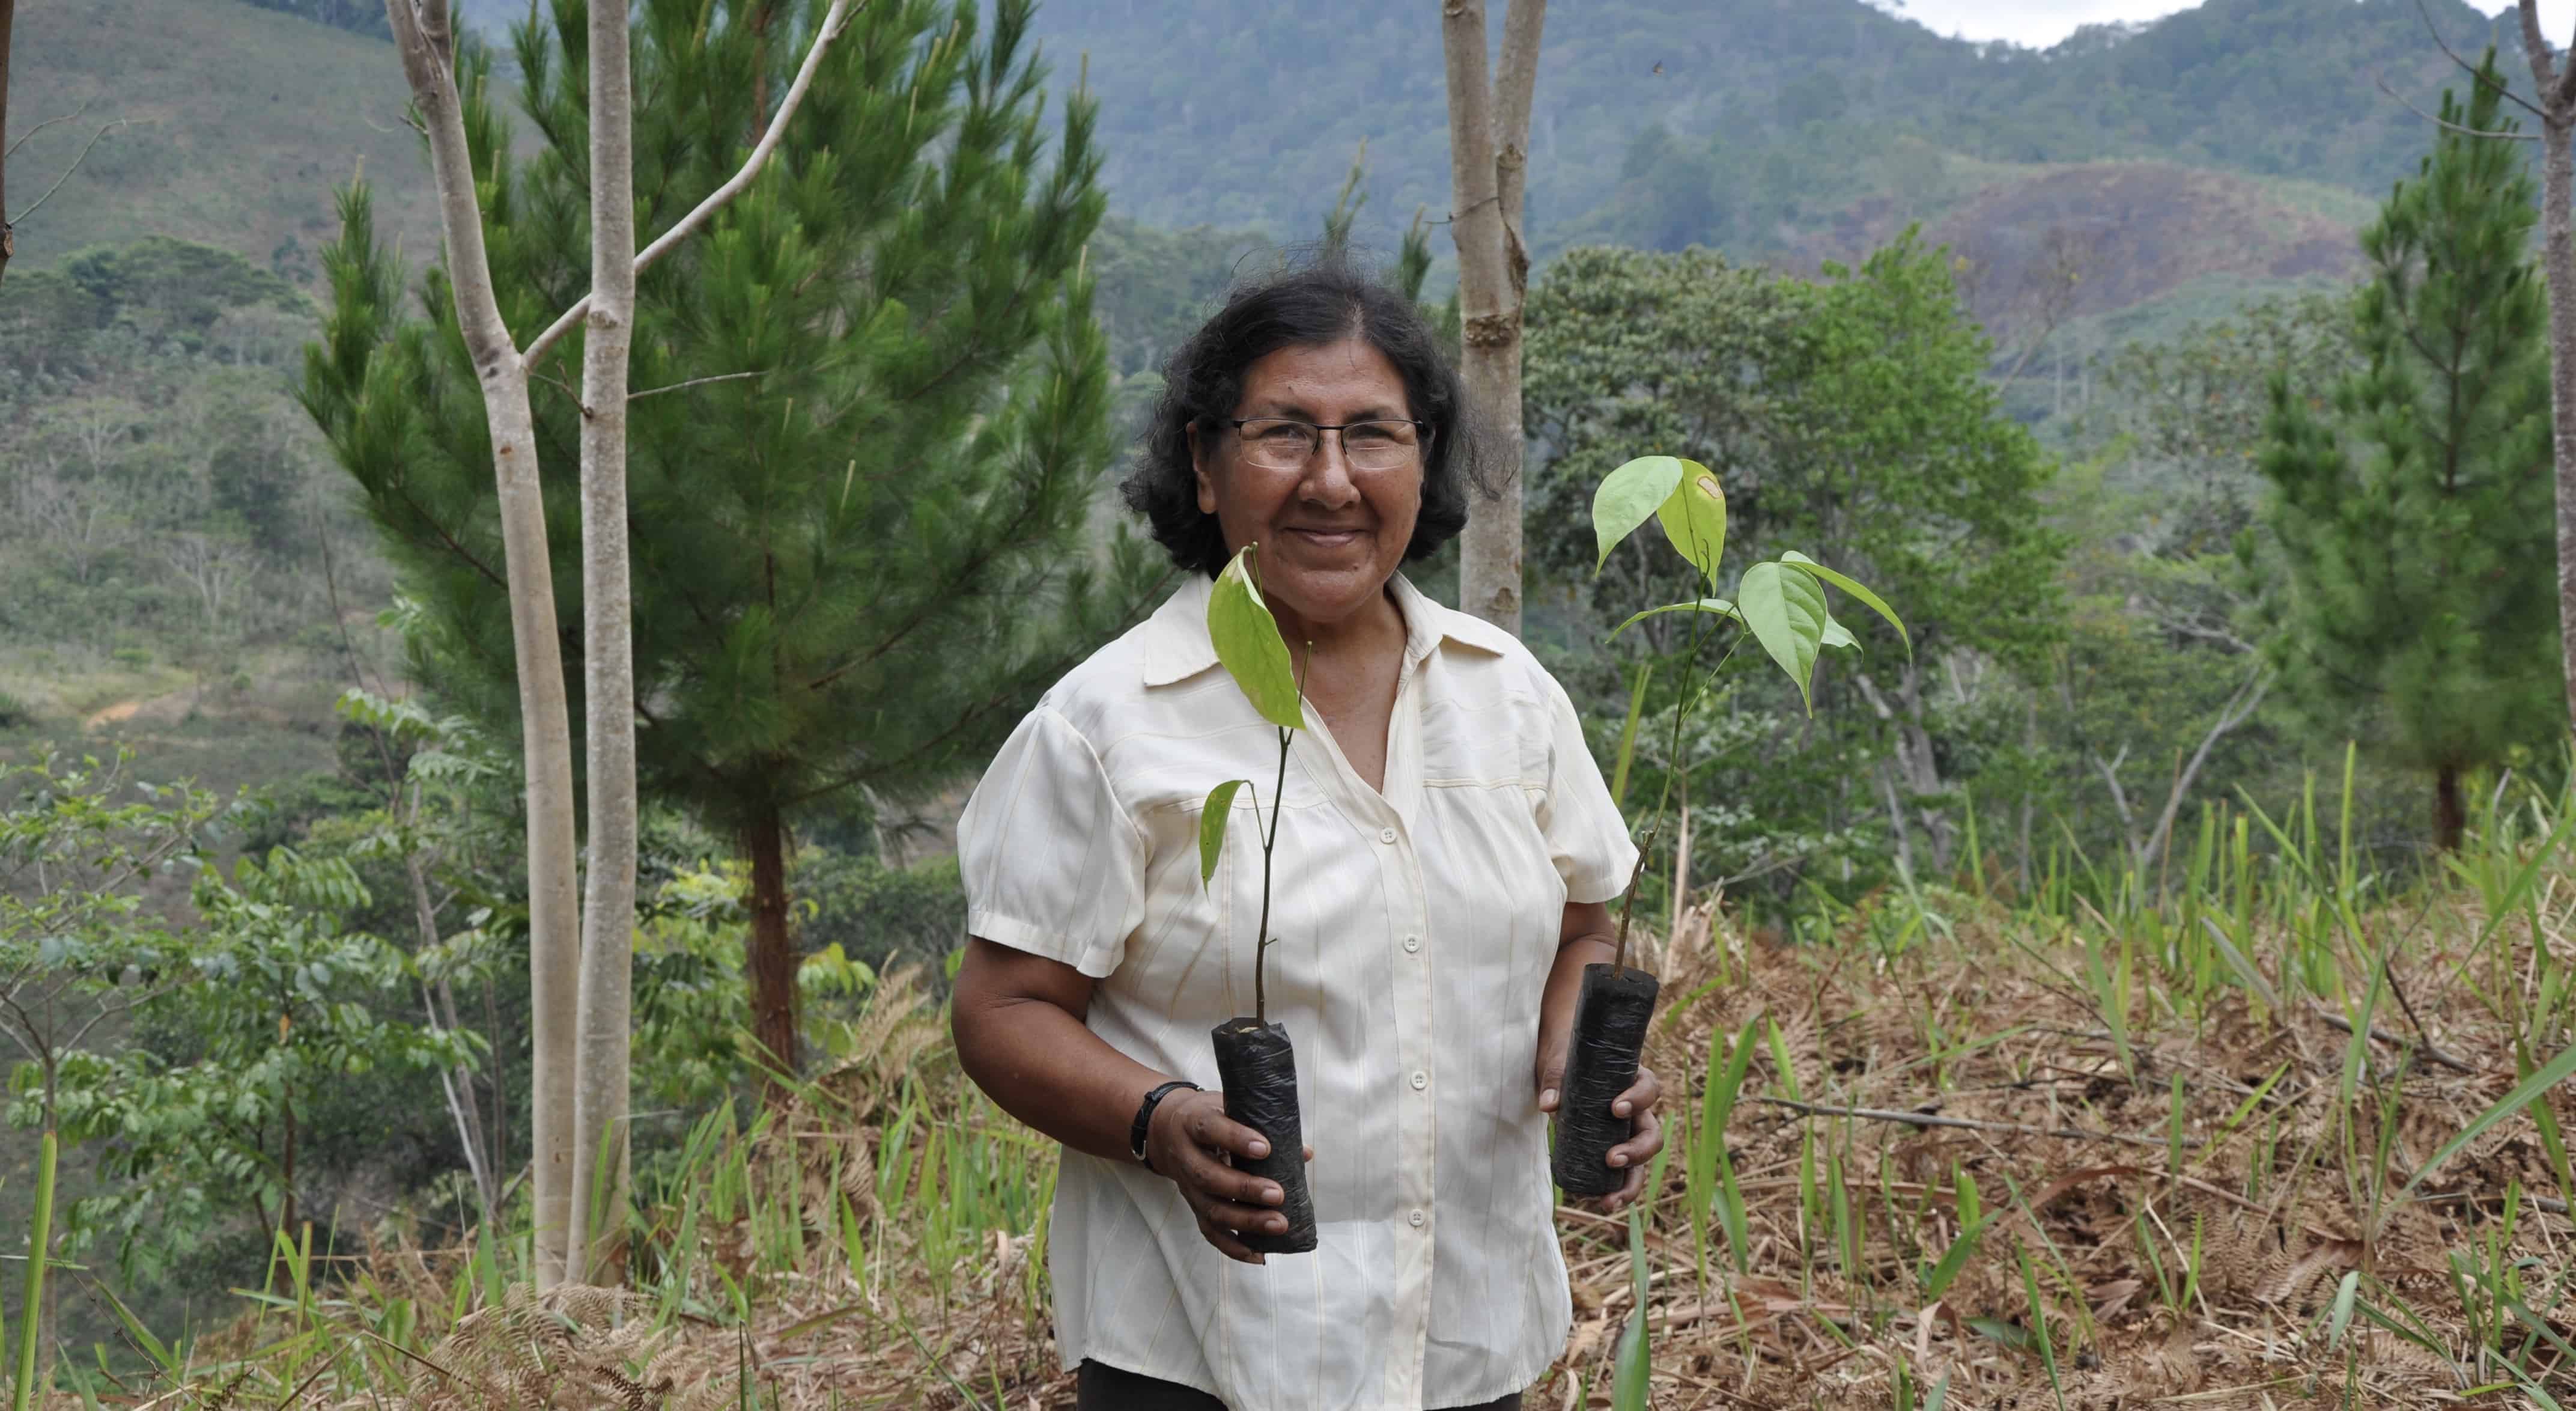 Grow Ahead supporting women led projects in Peru